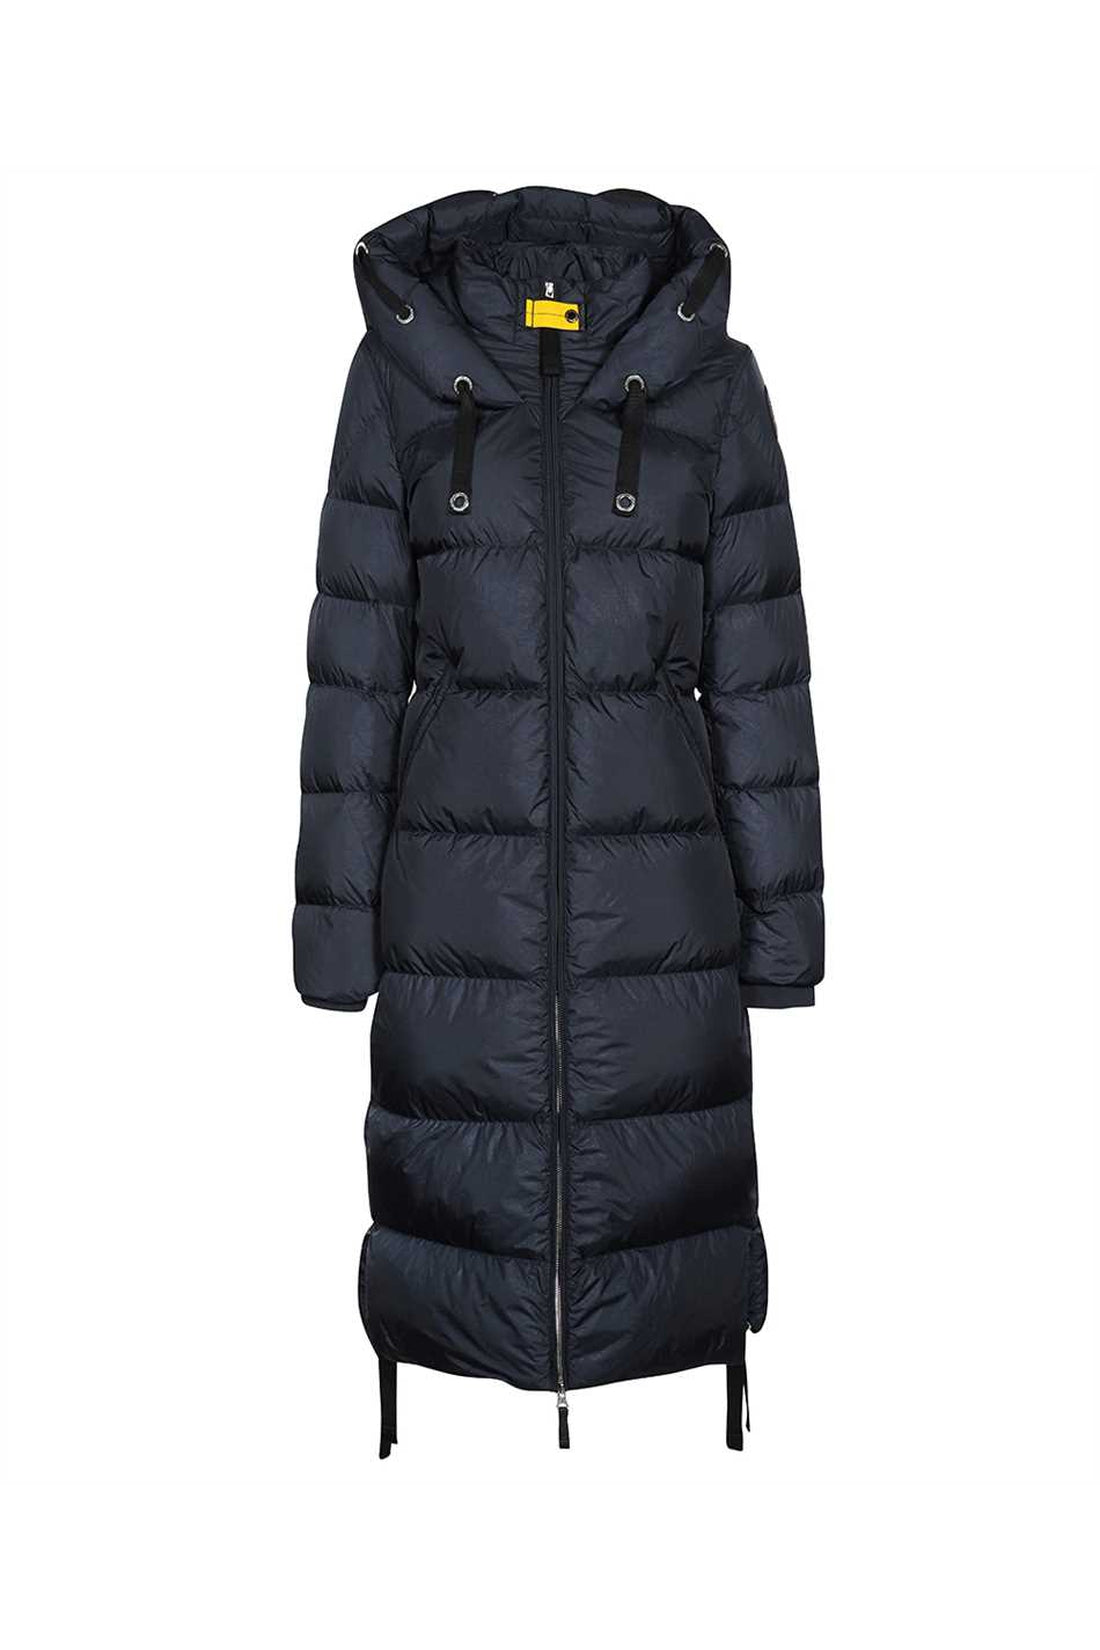 Parajumpers-OUTLET-SALE-Panda long hooded down jacket-ARCHIVIST